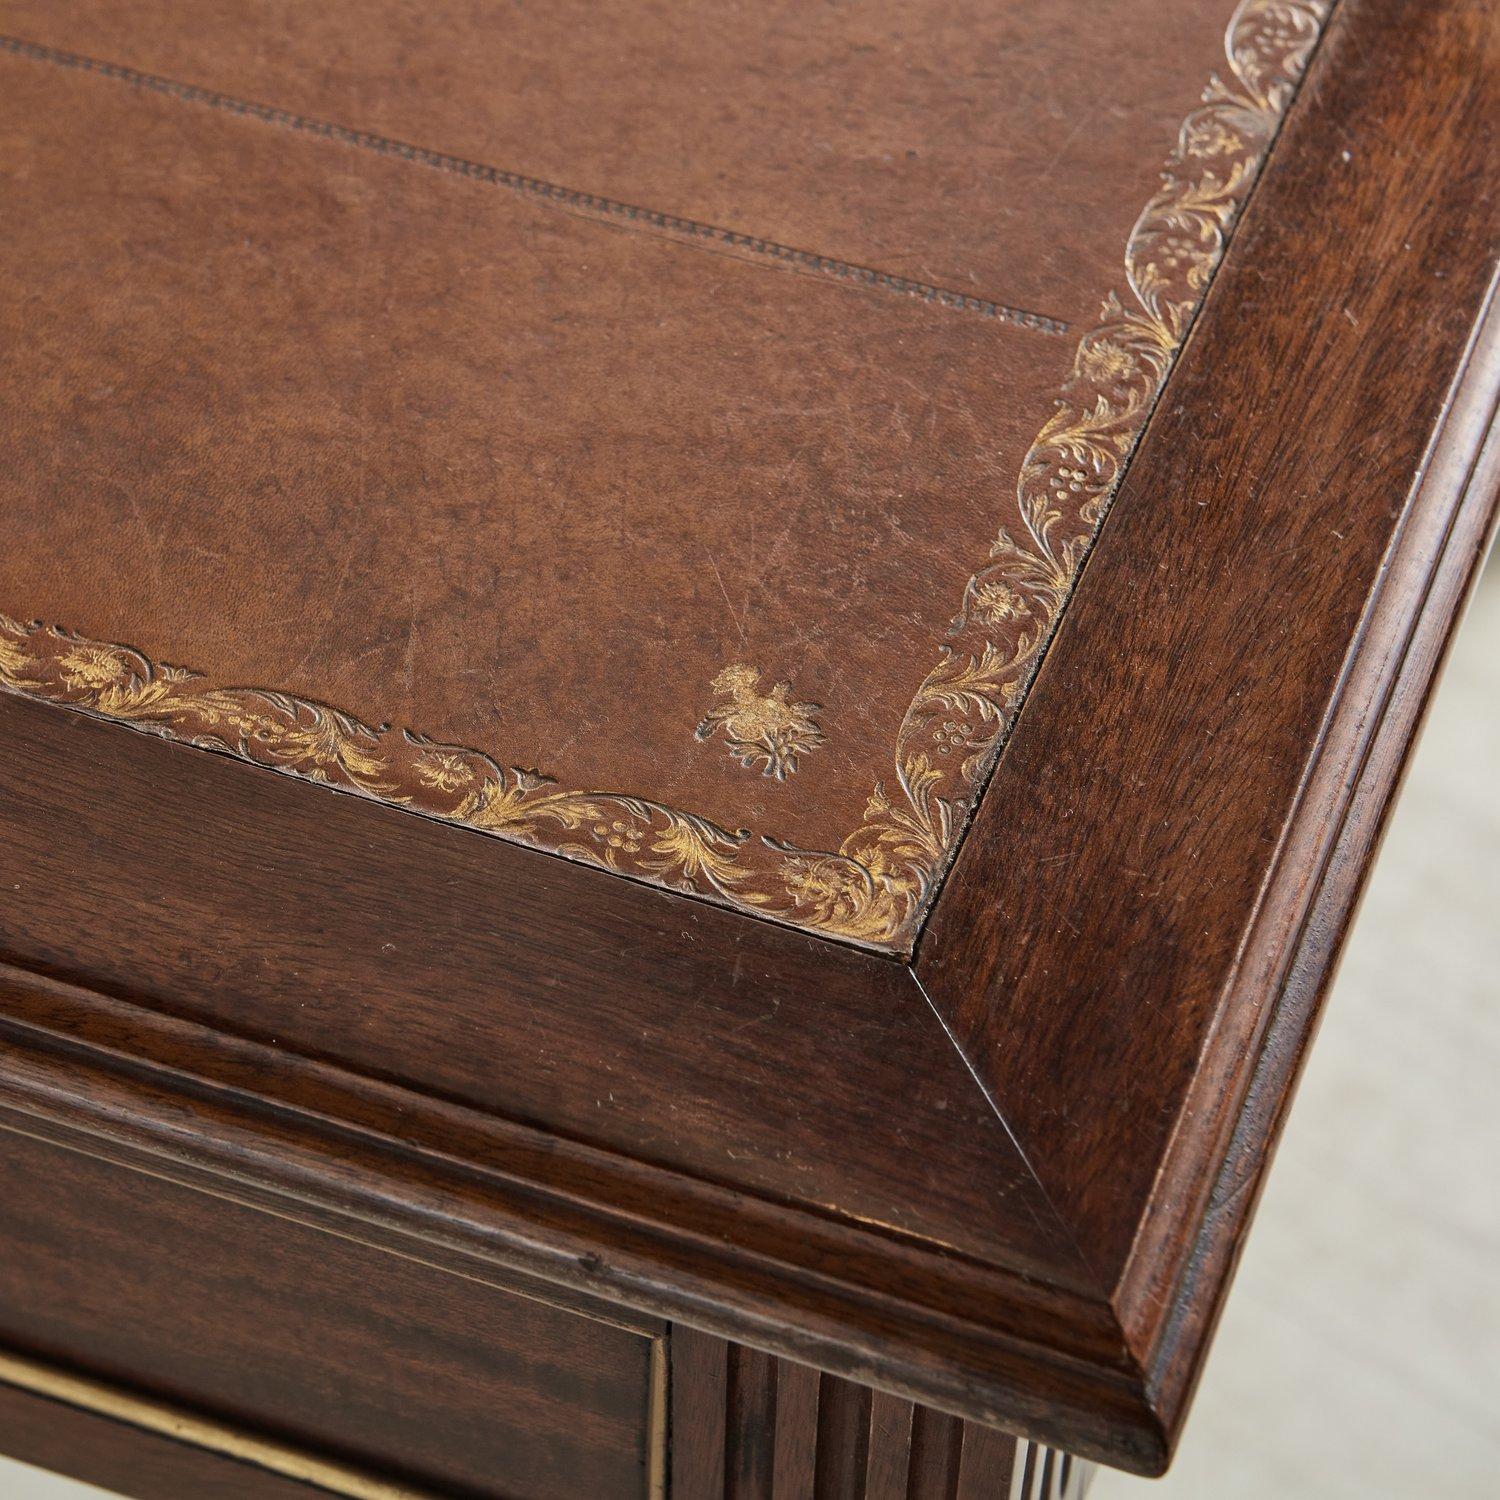 Mahogany Desk With Inlaid Leather Top and Gold Leaf Details, Early 20th Century 7